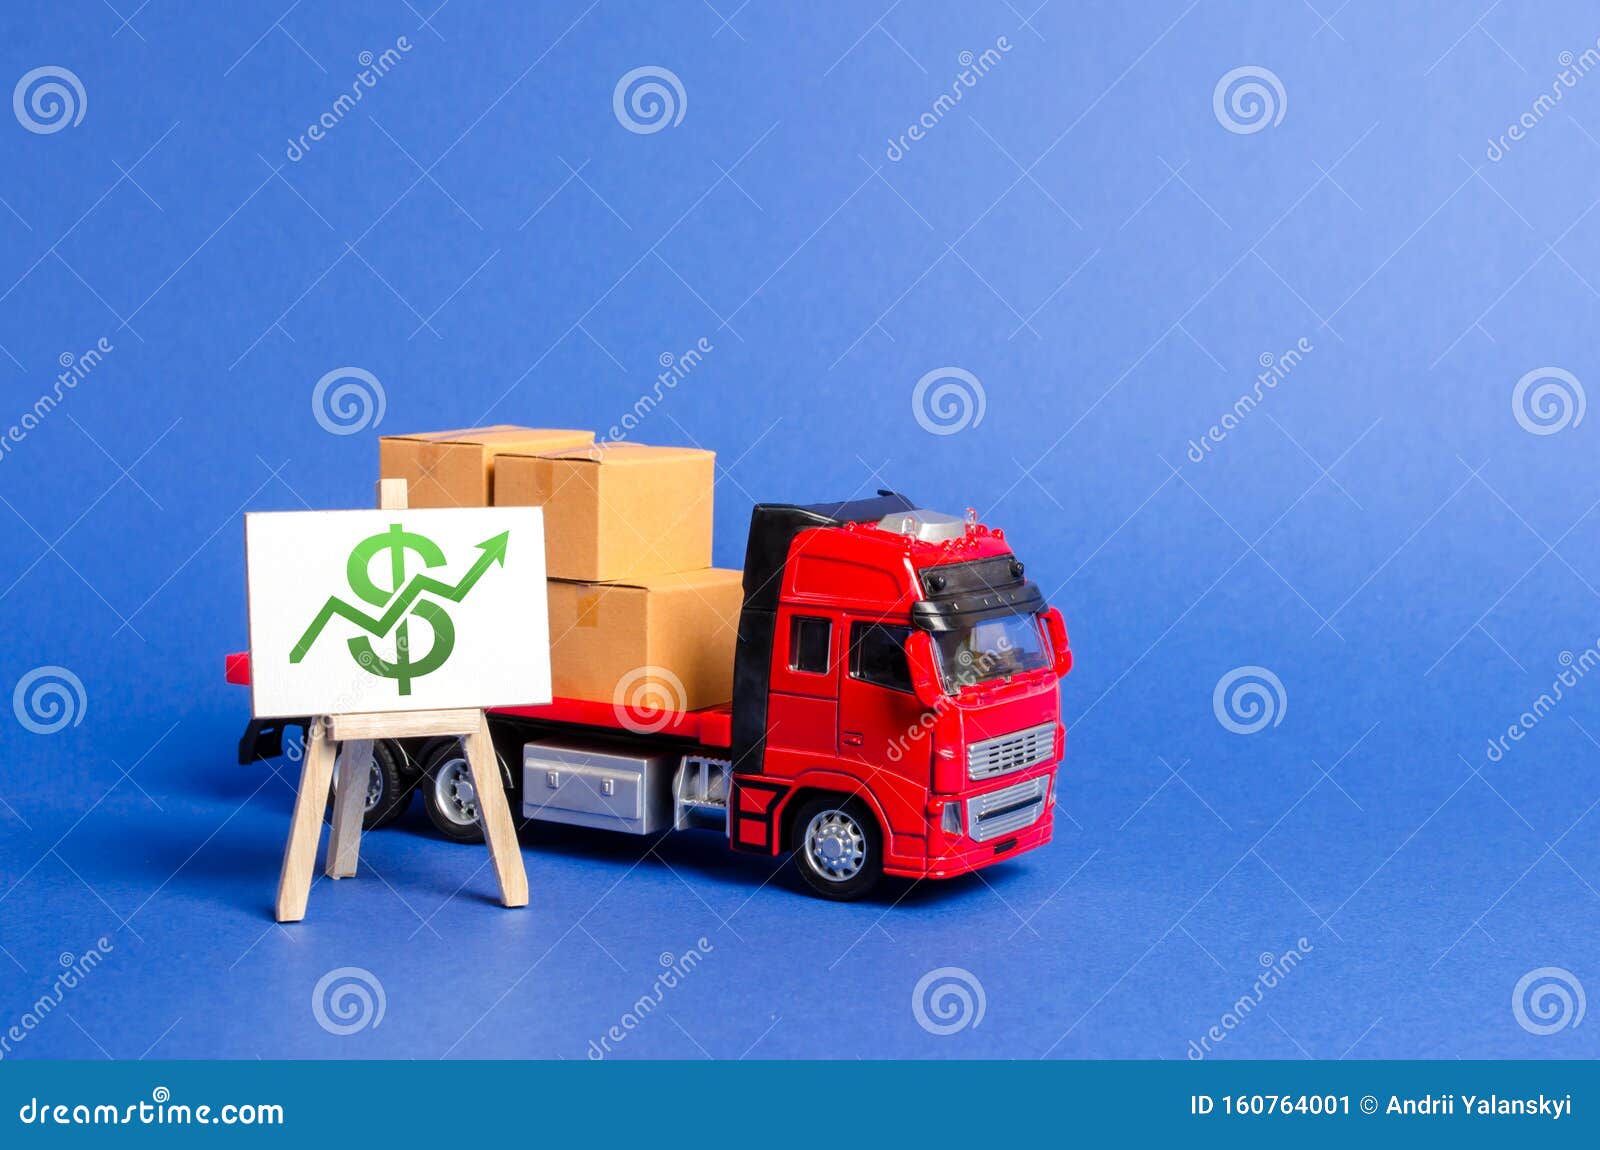 red truck loaded with boxes and stand with a green dollar up arrow. raise economic indicators and sales. exports imports